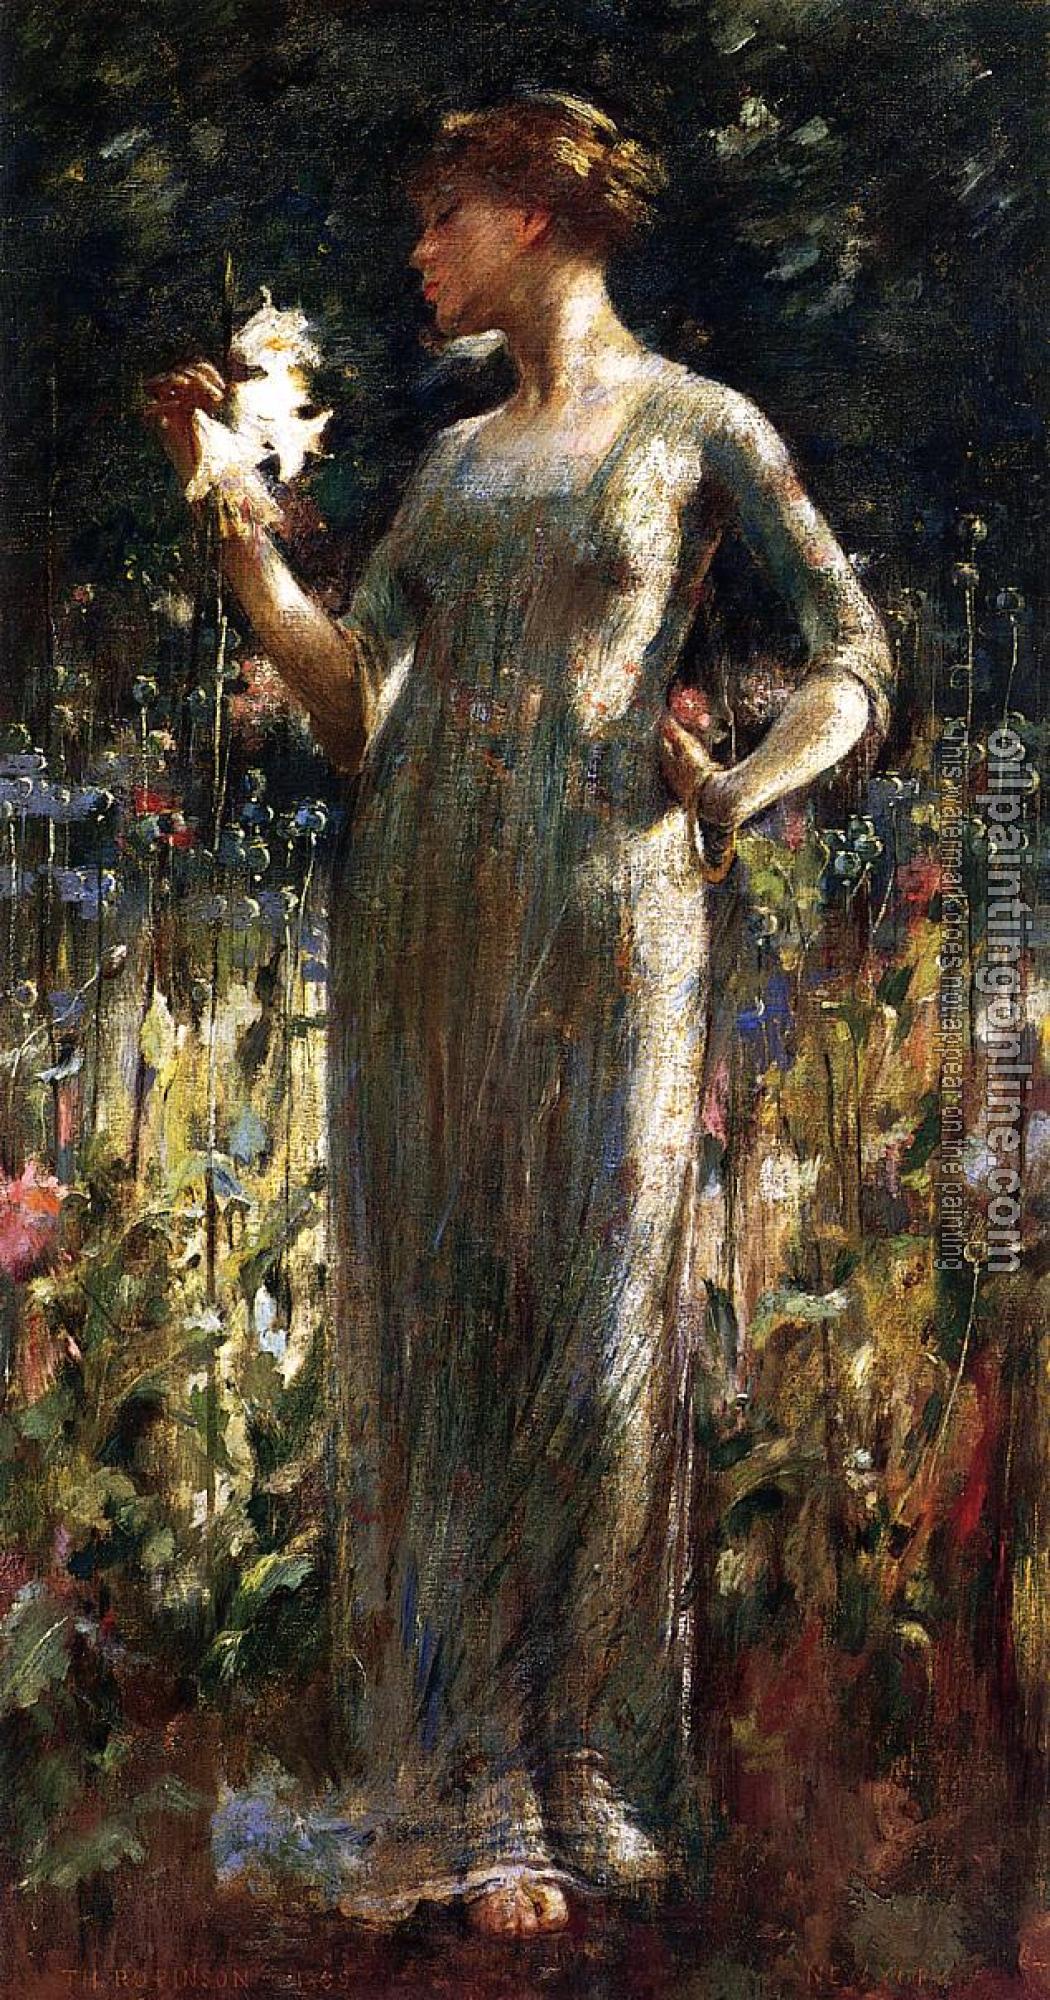 Alexander, John White - A King's Daughter, Girl with Lilies